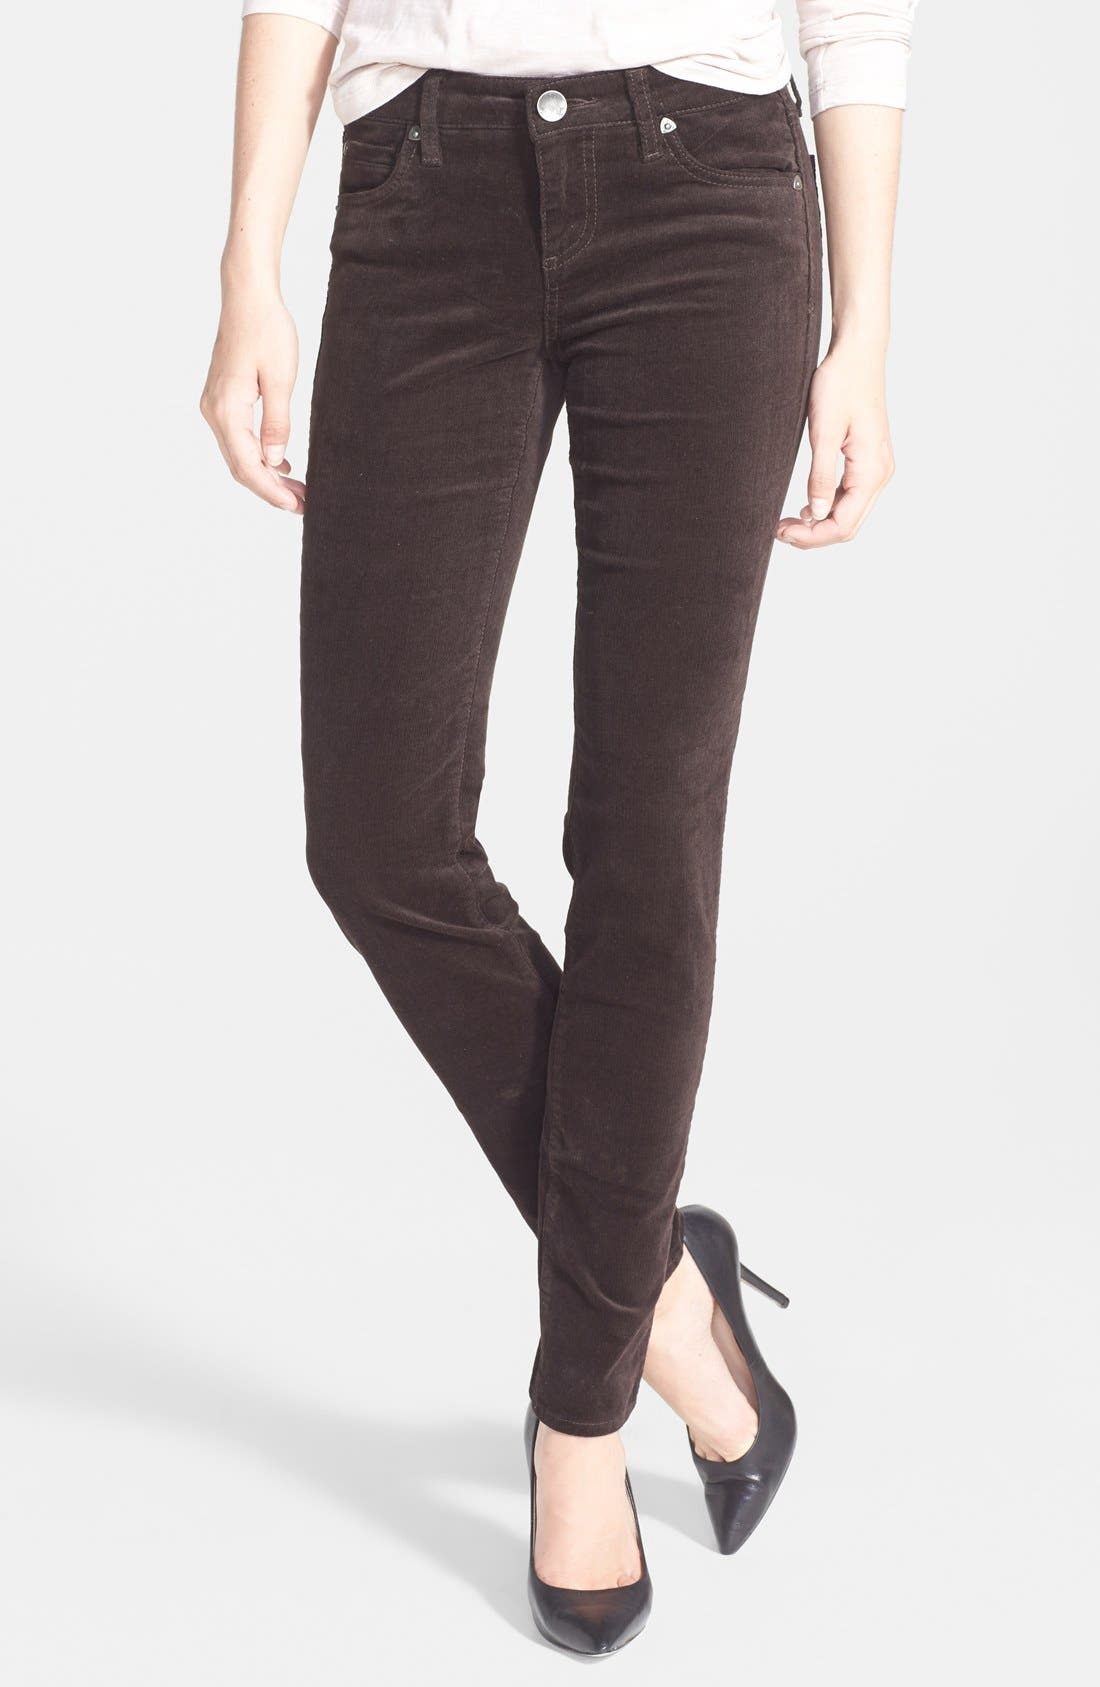 Kut From The Kloth Diana Stretch Corduroy Skinny Pants In Brown Bean